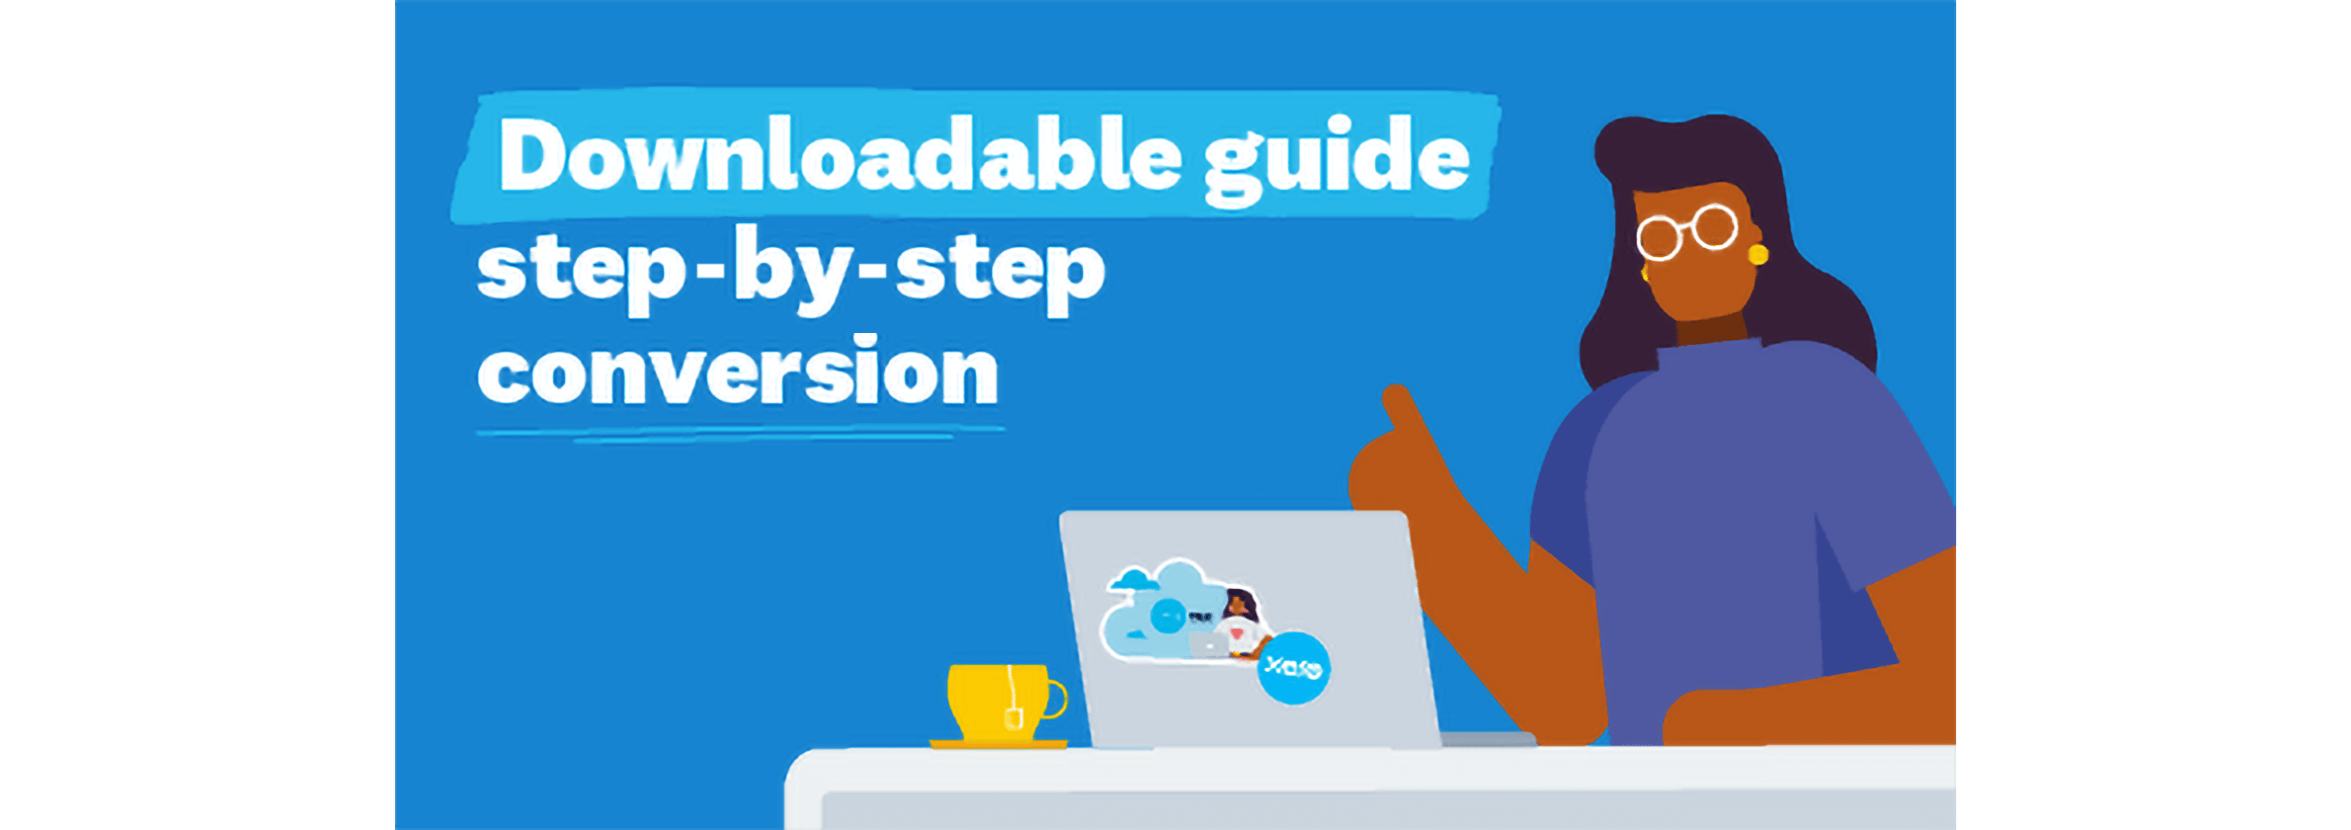 A small business owner downloads the step-by-step conversion guide on their laptop.